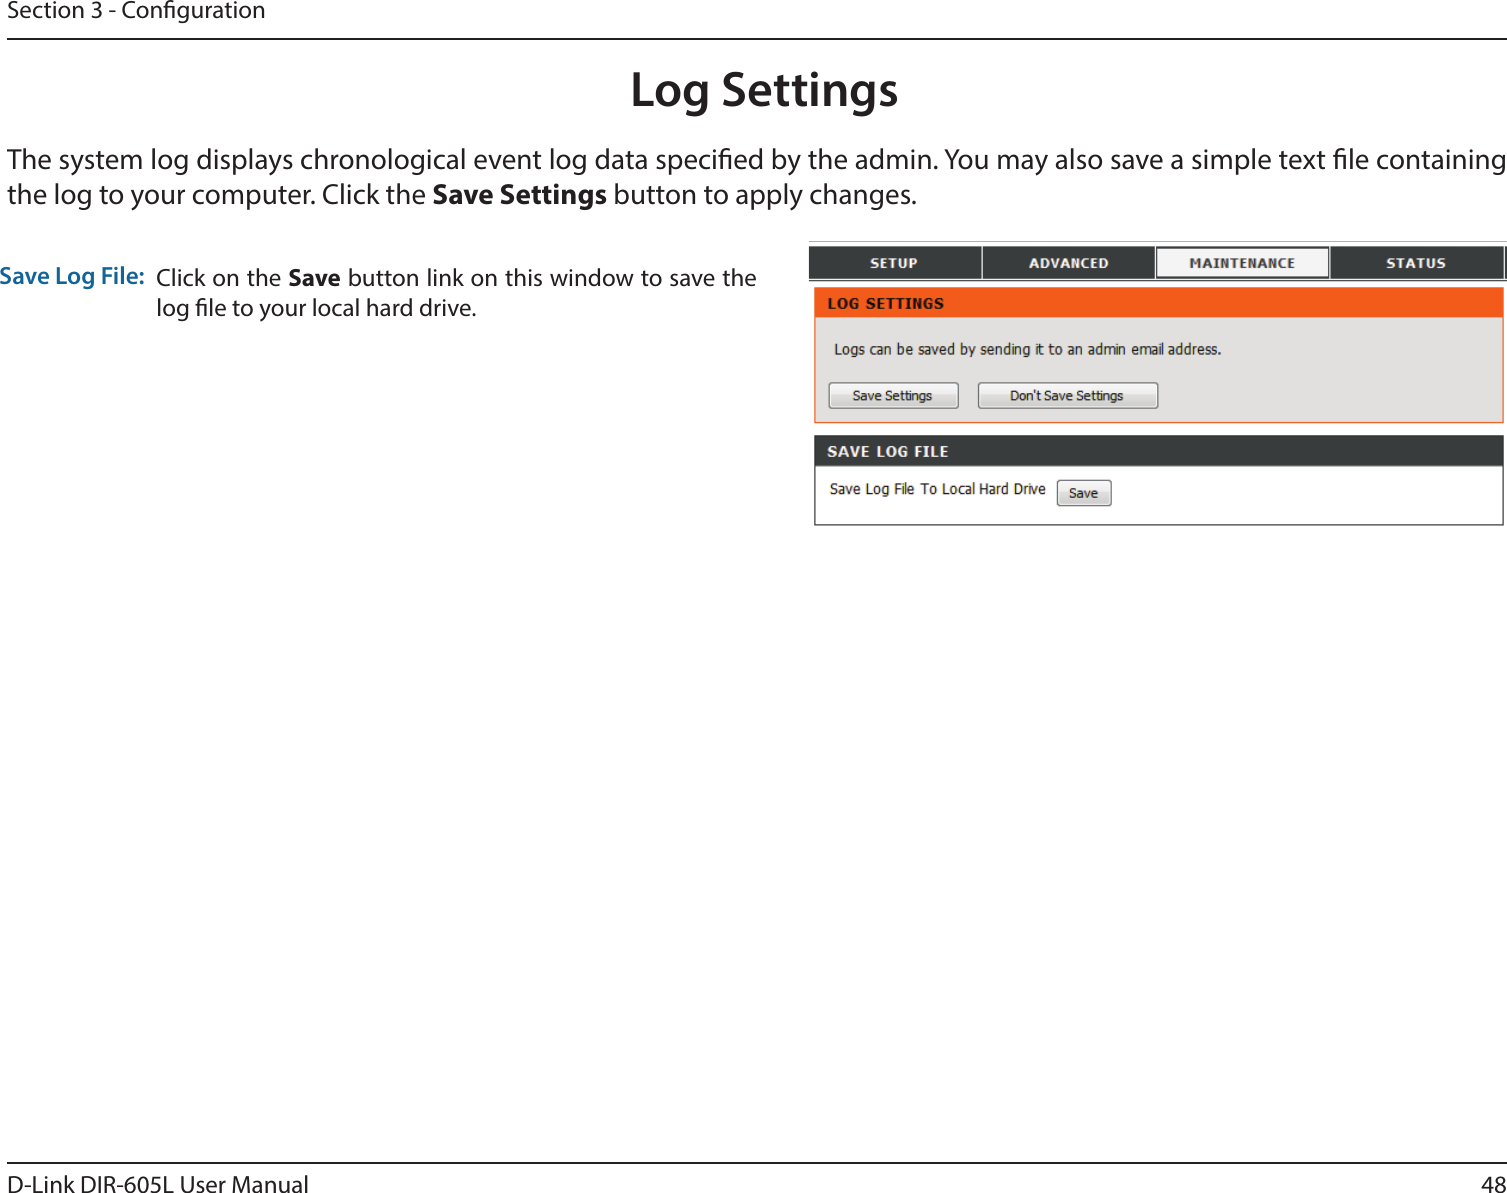 48D-Link DIR-605L User ManualSection 3 - CongurationLog SettingsClick on the Save button link on this window to save the log le to your local hard drive.Save Log File:The system log displays chronological event log data specied by the admin. You may also save a simple text le containing the log to your computer. Click the Save Settings button to apply changes.